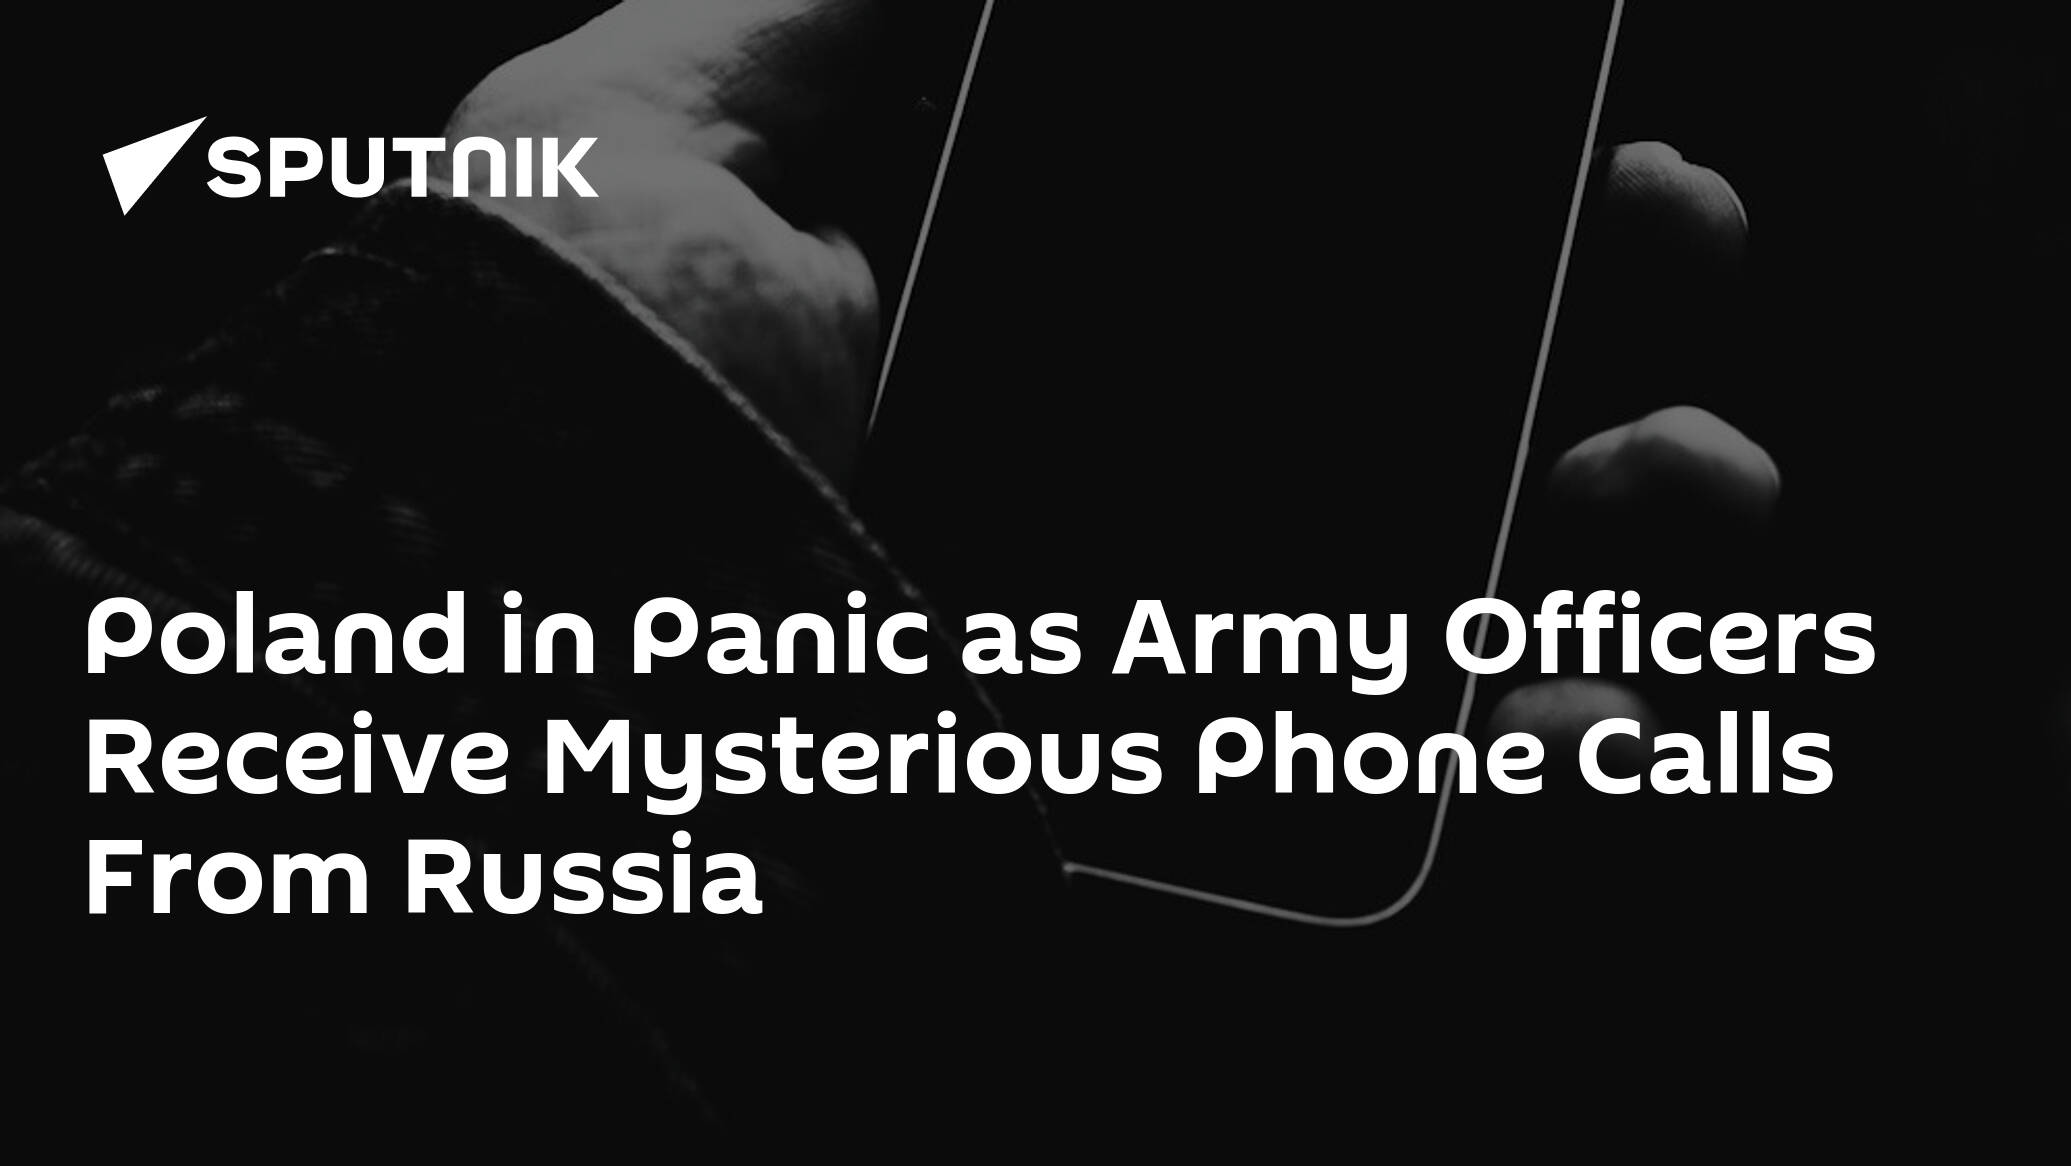 Poland in Panic as Army Officers Receive Mysterious Phone Calls From